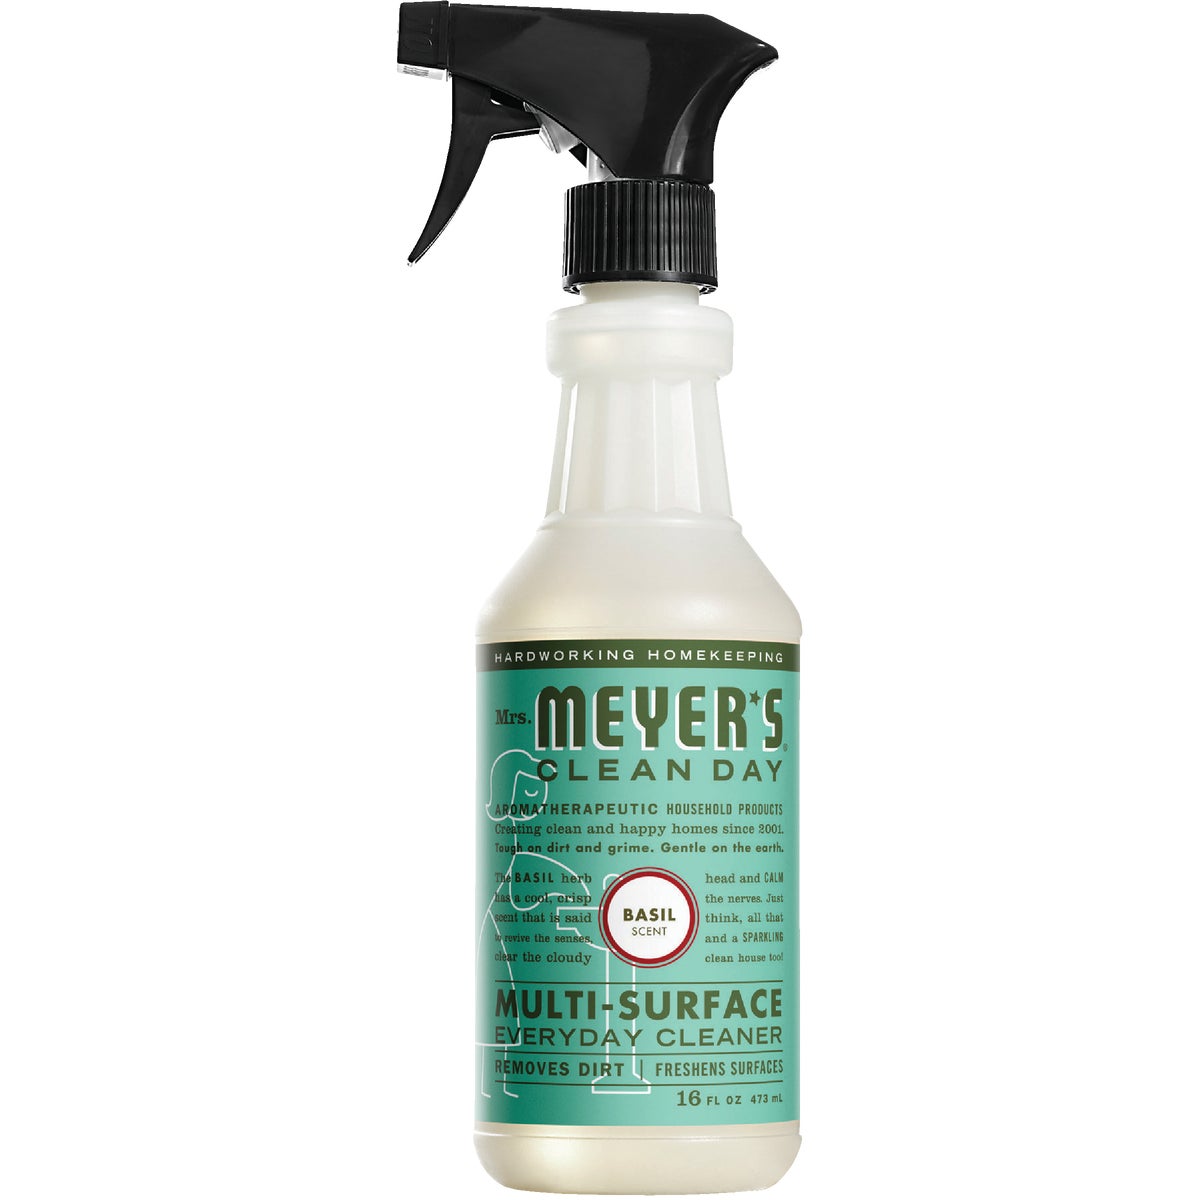 Mrs. Meyer's Clean Day 16 Oz. Basil Multi-Surface Everyday Cleaner